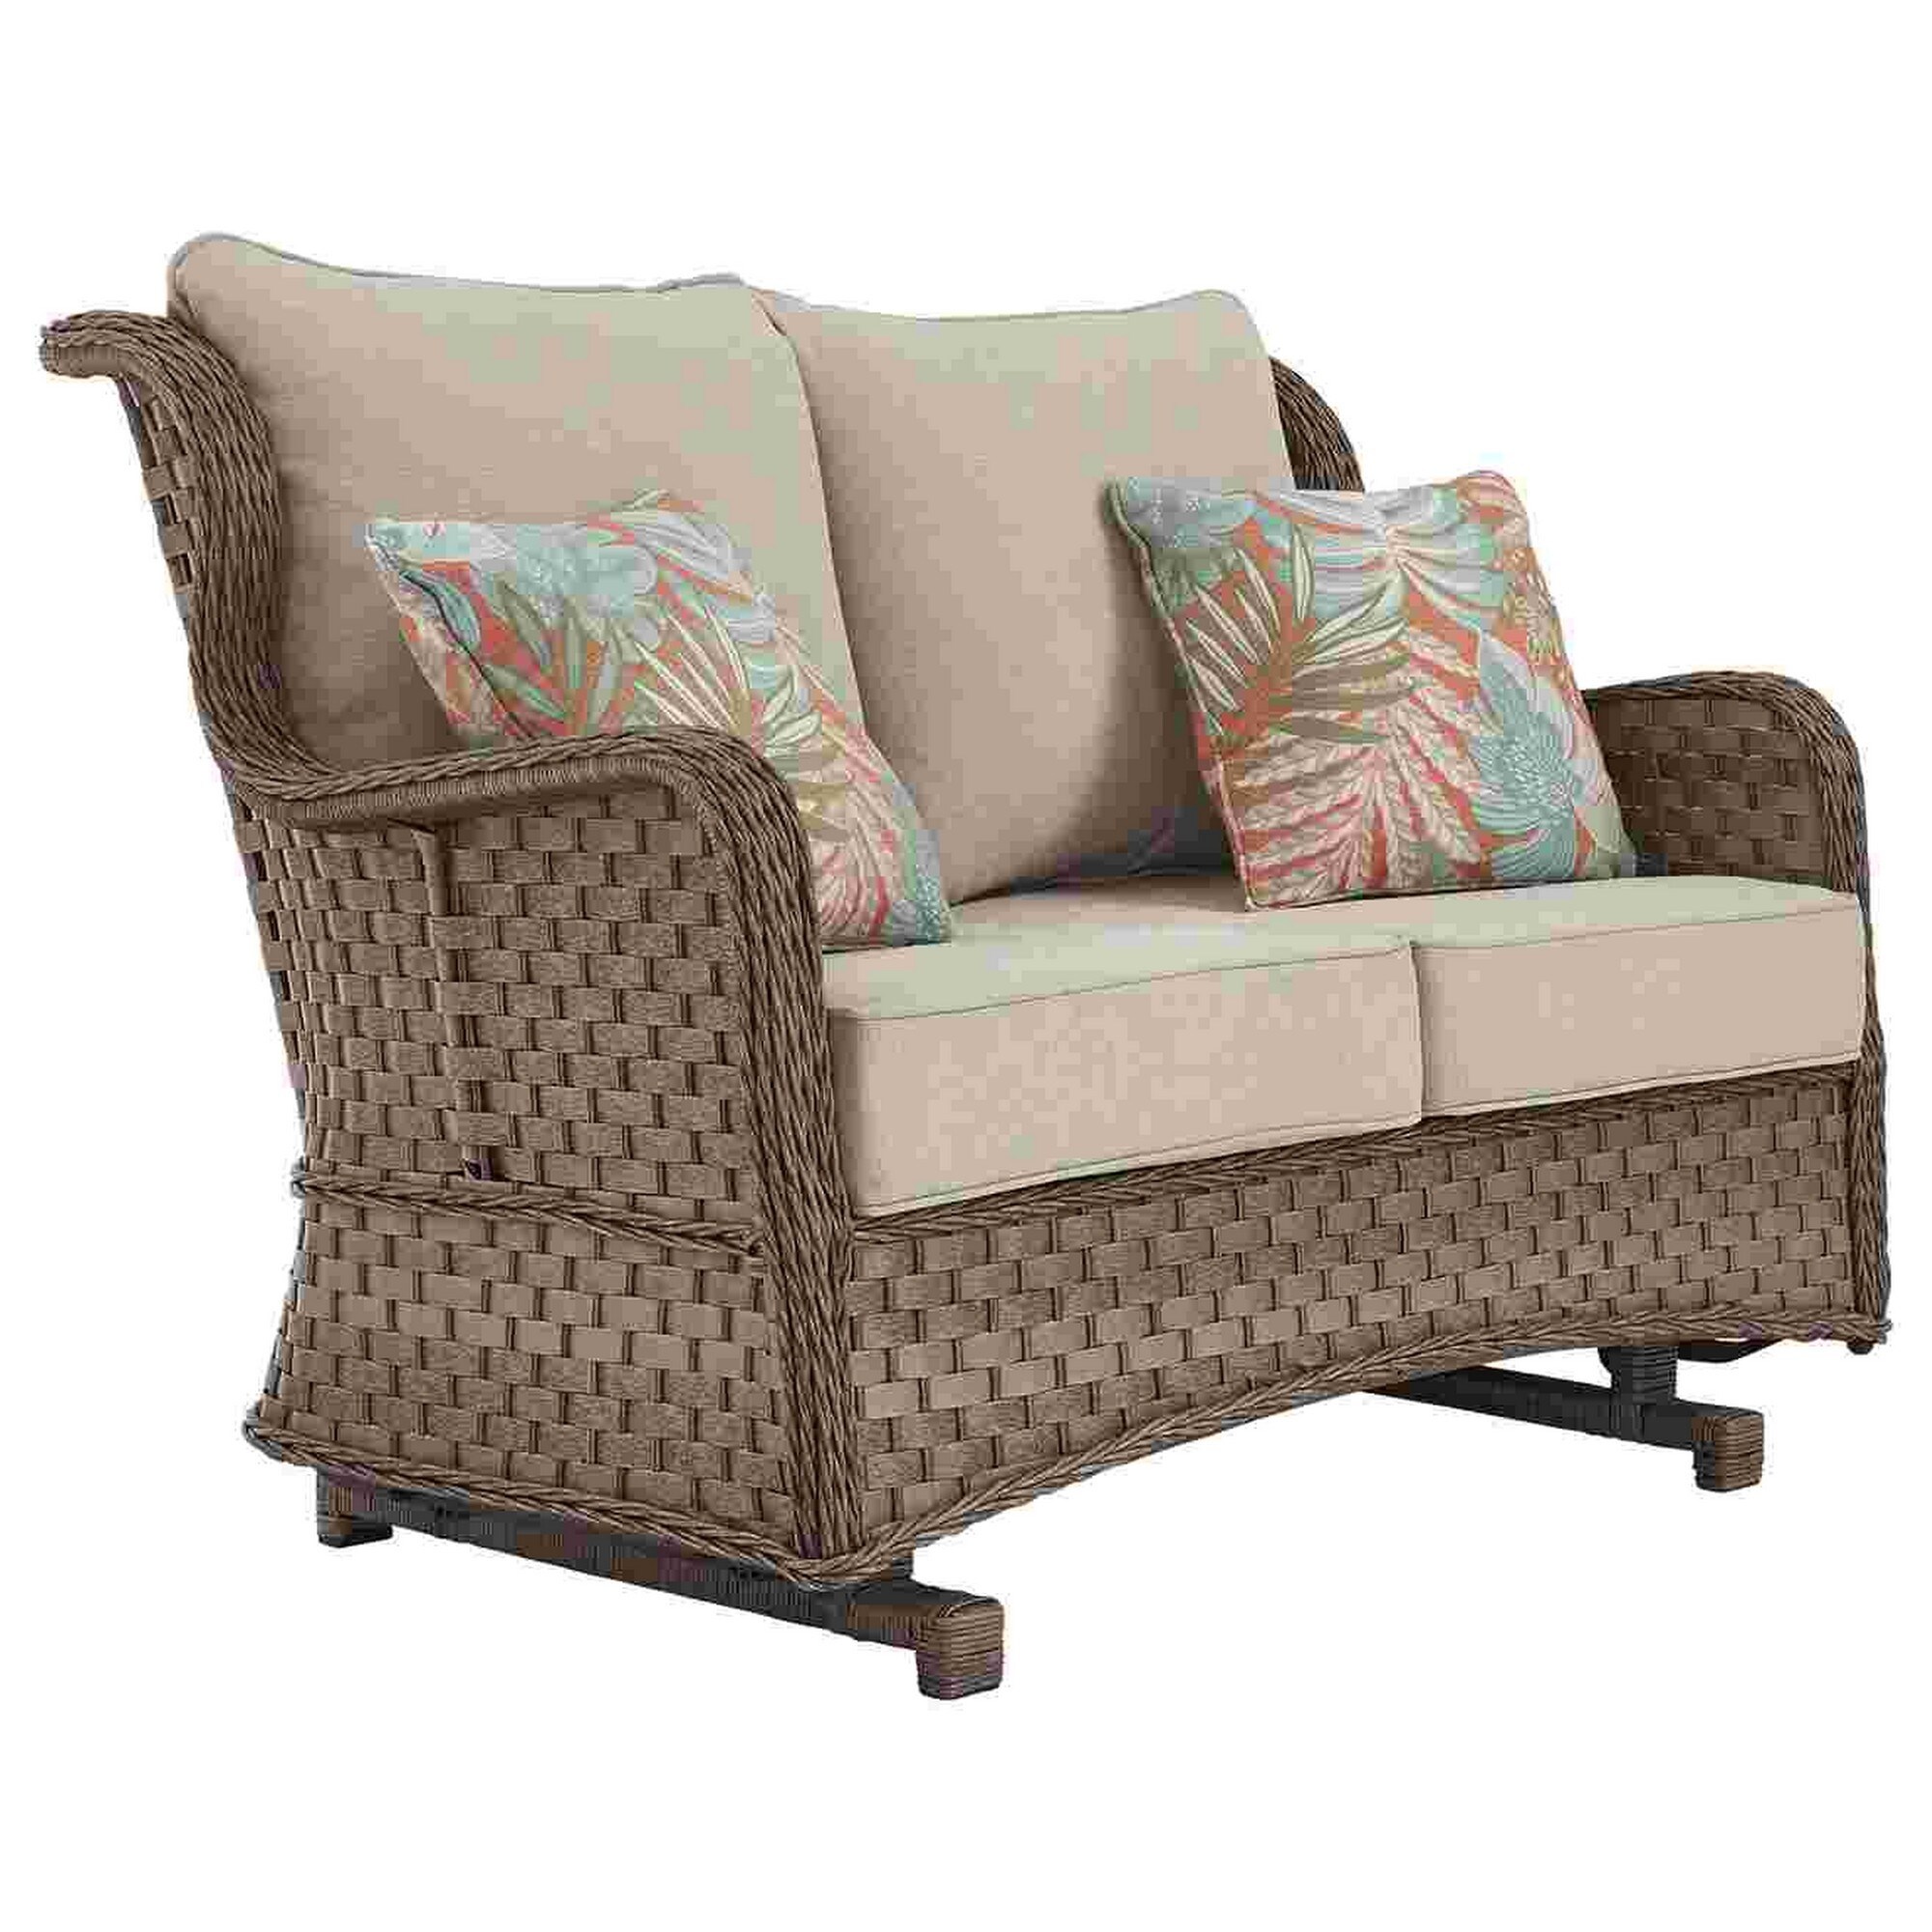 Outdoor Loveseat With Woven Wicker And Glider Base  Brown